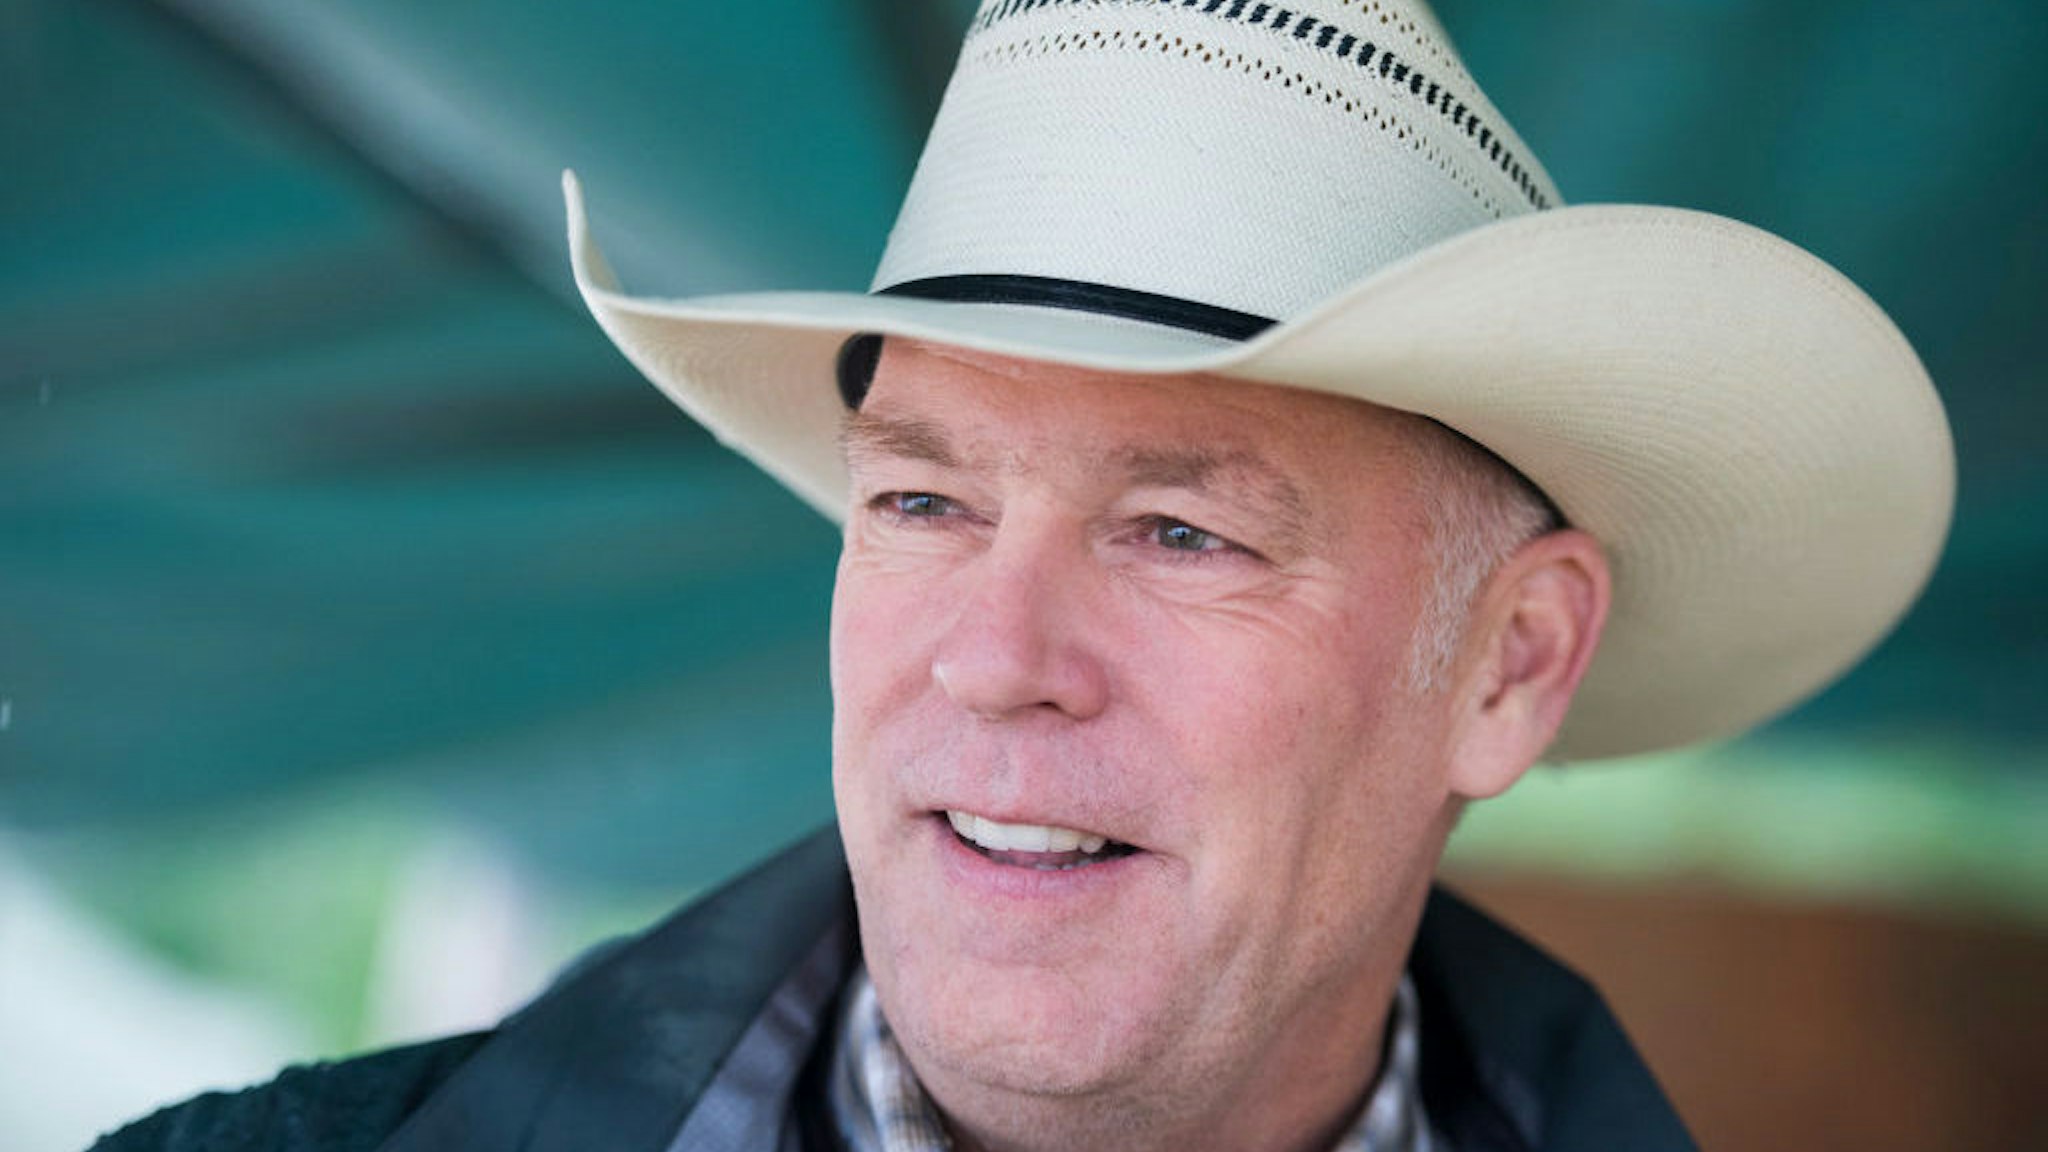 UNITED STATES - AUGUST 18: Rep. Greg Gianforte, R-Mont. attends the Crow Fair in Crow Agency, Mont., on August 18, 2018. Gianforte is being challenged by Democrat Kathleen Williams. (Photo By Tom Williams/CQ Roll Call)